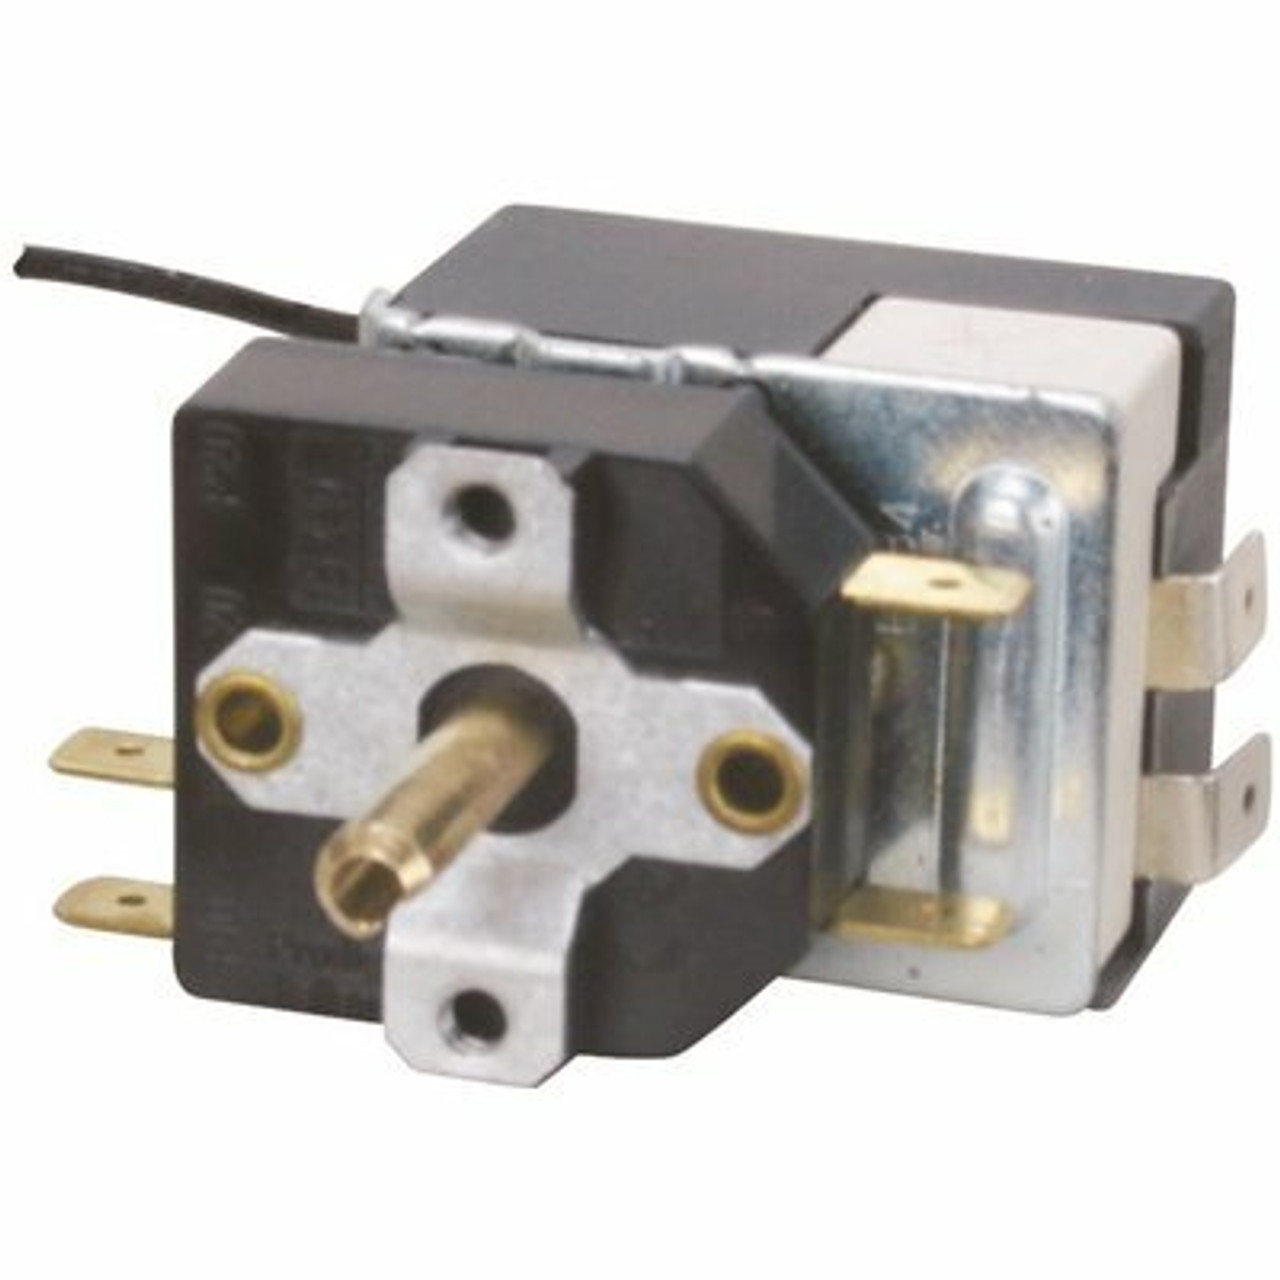 Exact Replacement Parts 240-Volts 20-Amps Oven Thermostat